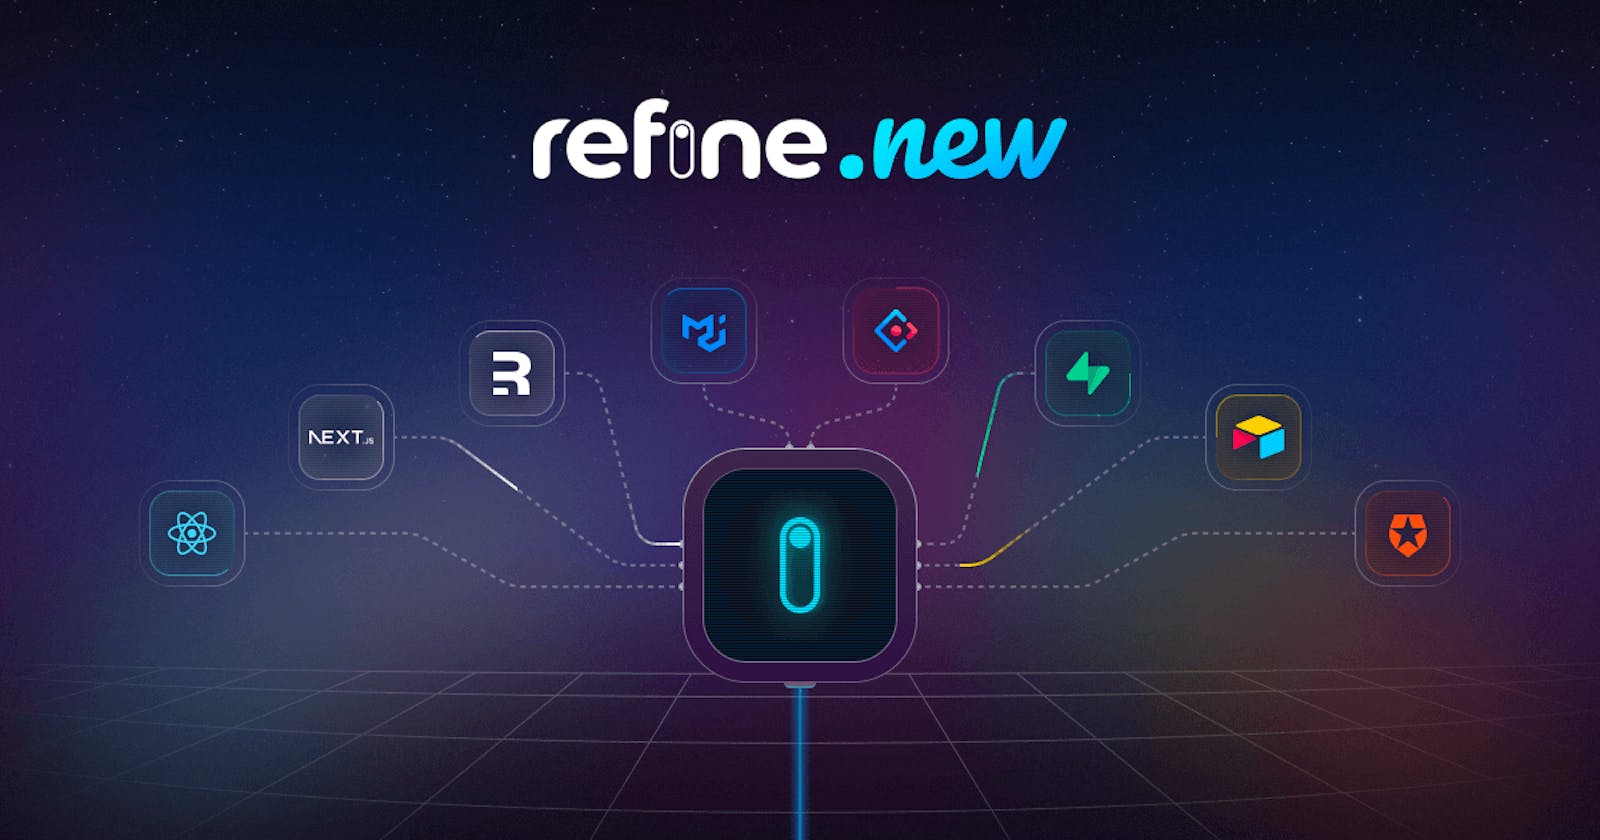 ⚡refine.new - Introducing the Fastest Way to Create React Apps